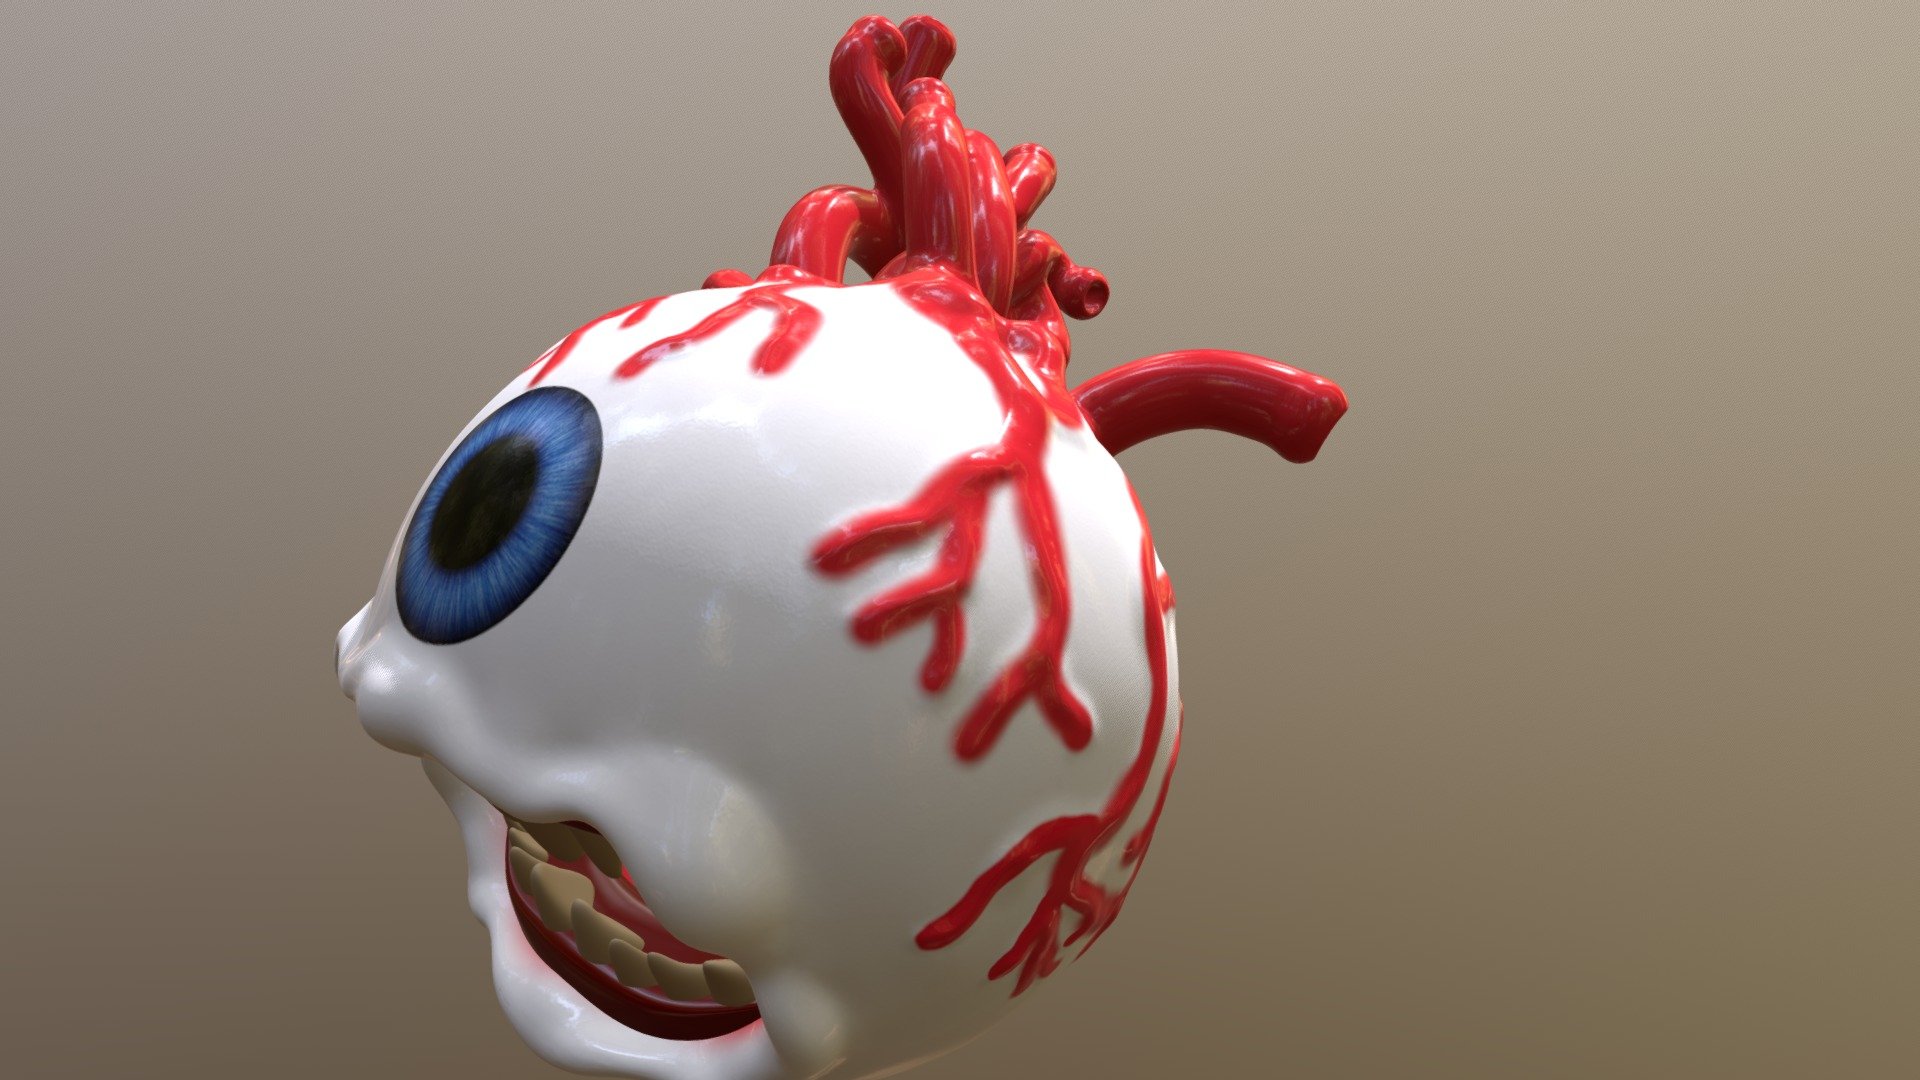 Additional Files include Blender Rig for Animation, as well as HighPoly and Decimated versions prepped for 3D Printing. 

Animation Example at: 
at youtube.com/nateordie or insta @nateordie82
or artstation.com/nateordie - Eye Ball Creature - Buy Royalty Free 3D model by nateordie 3d model